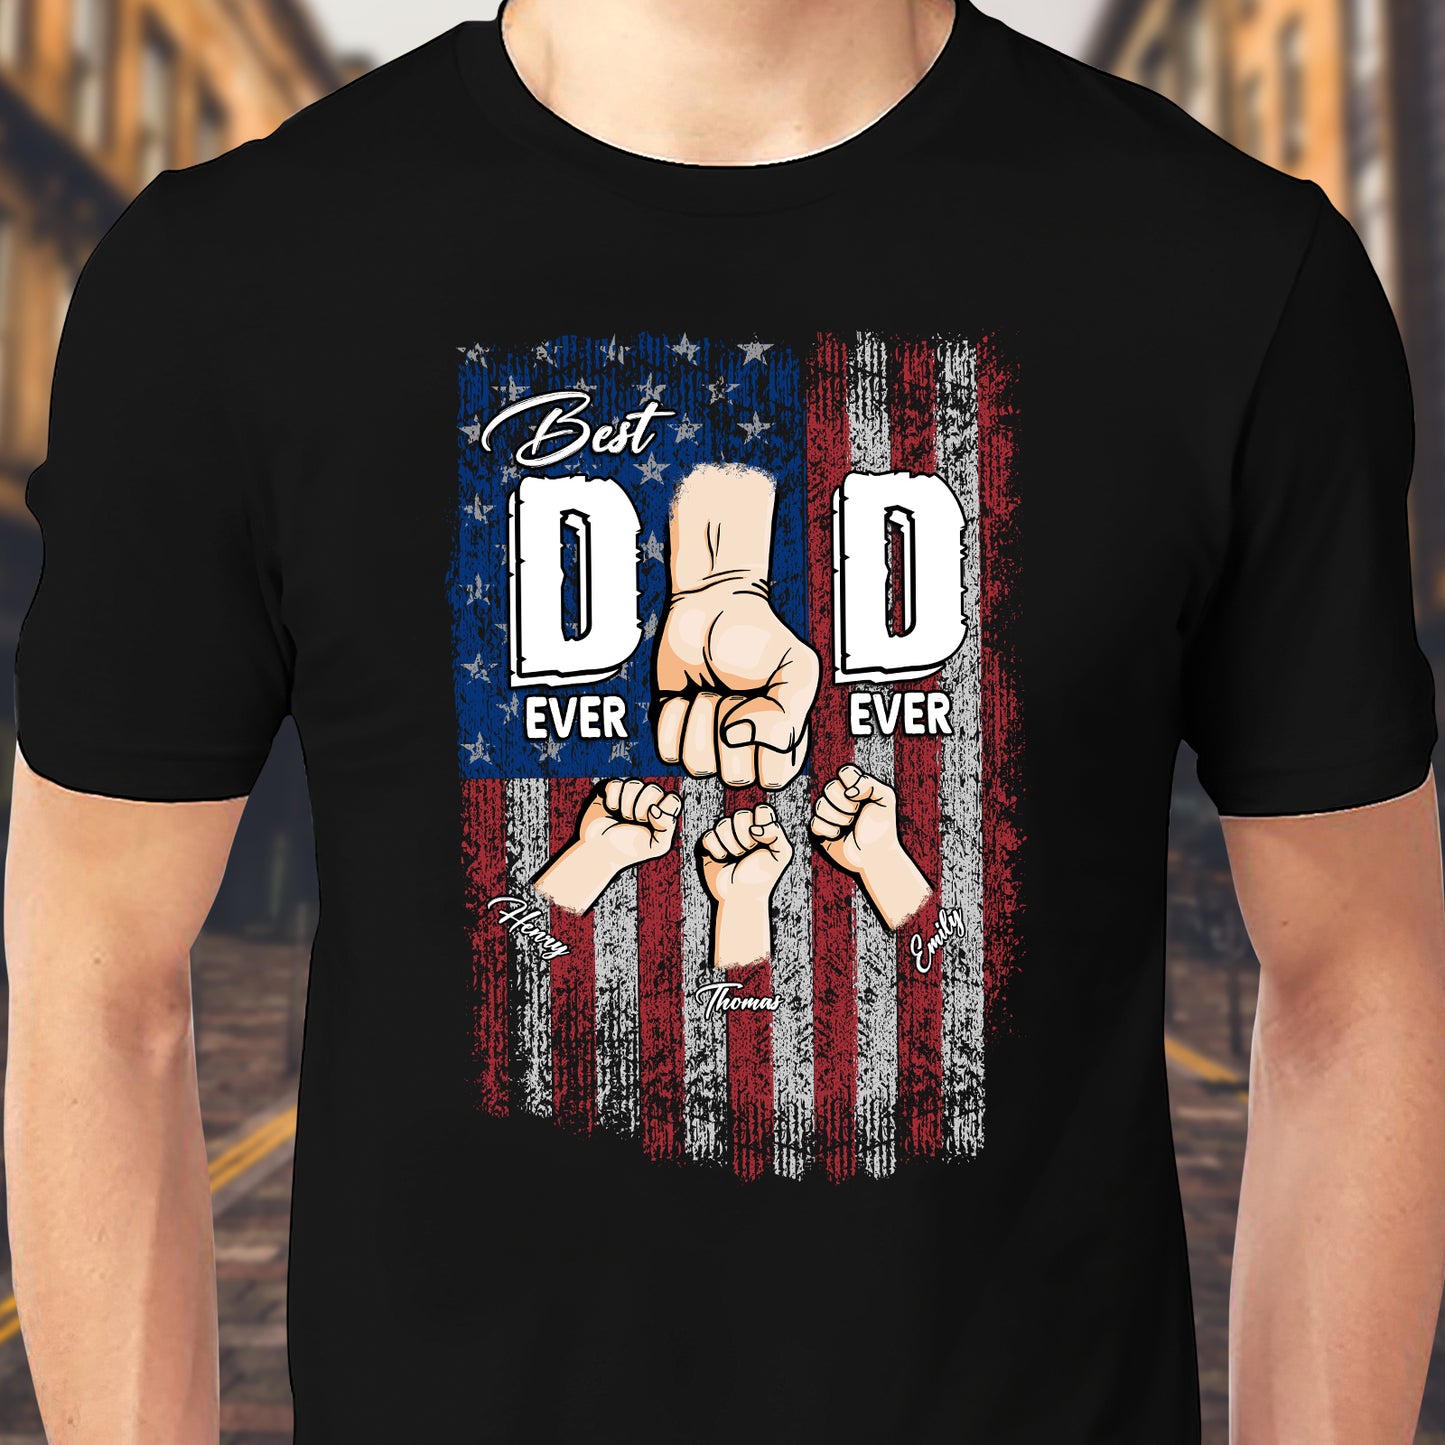 Family - Best Dad Ever Ever - Personalized Shirt